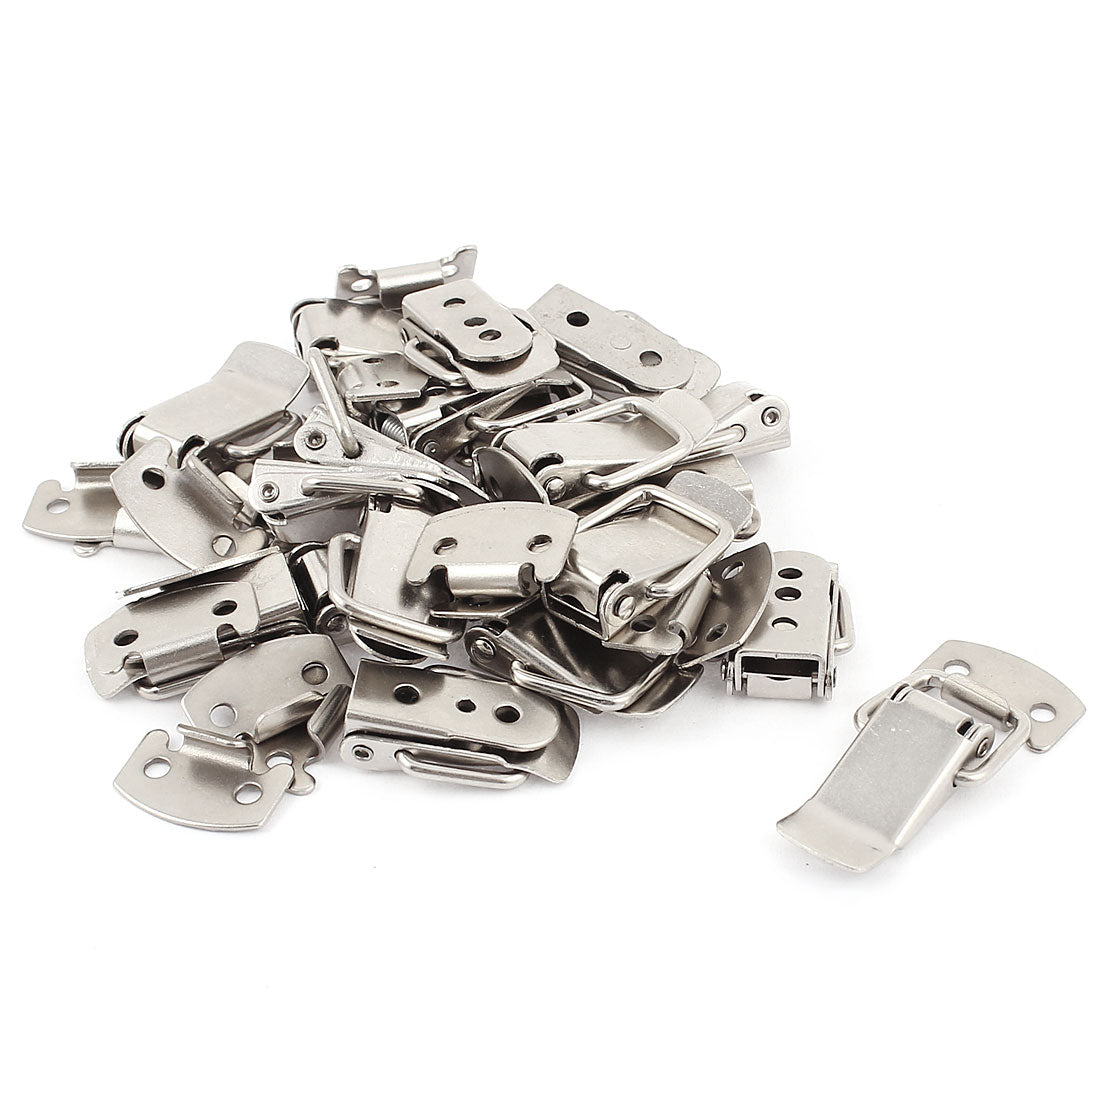 uxcell Uxcell 20 Pcs Silver Case Box Chest Spring Loaded Iron Tone Draw Lock Toggle Latch